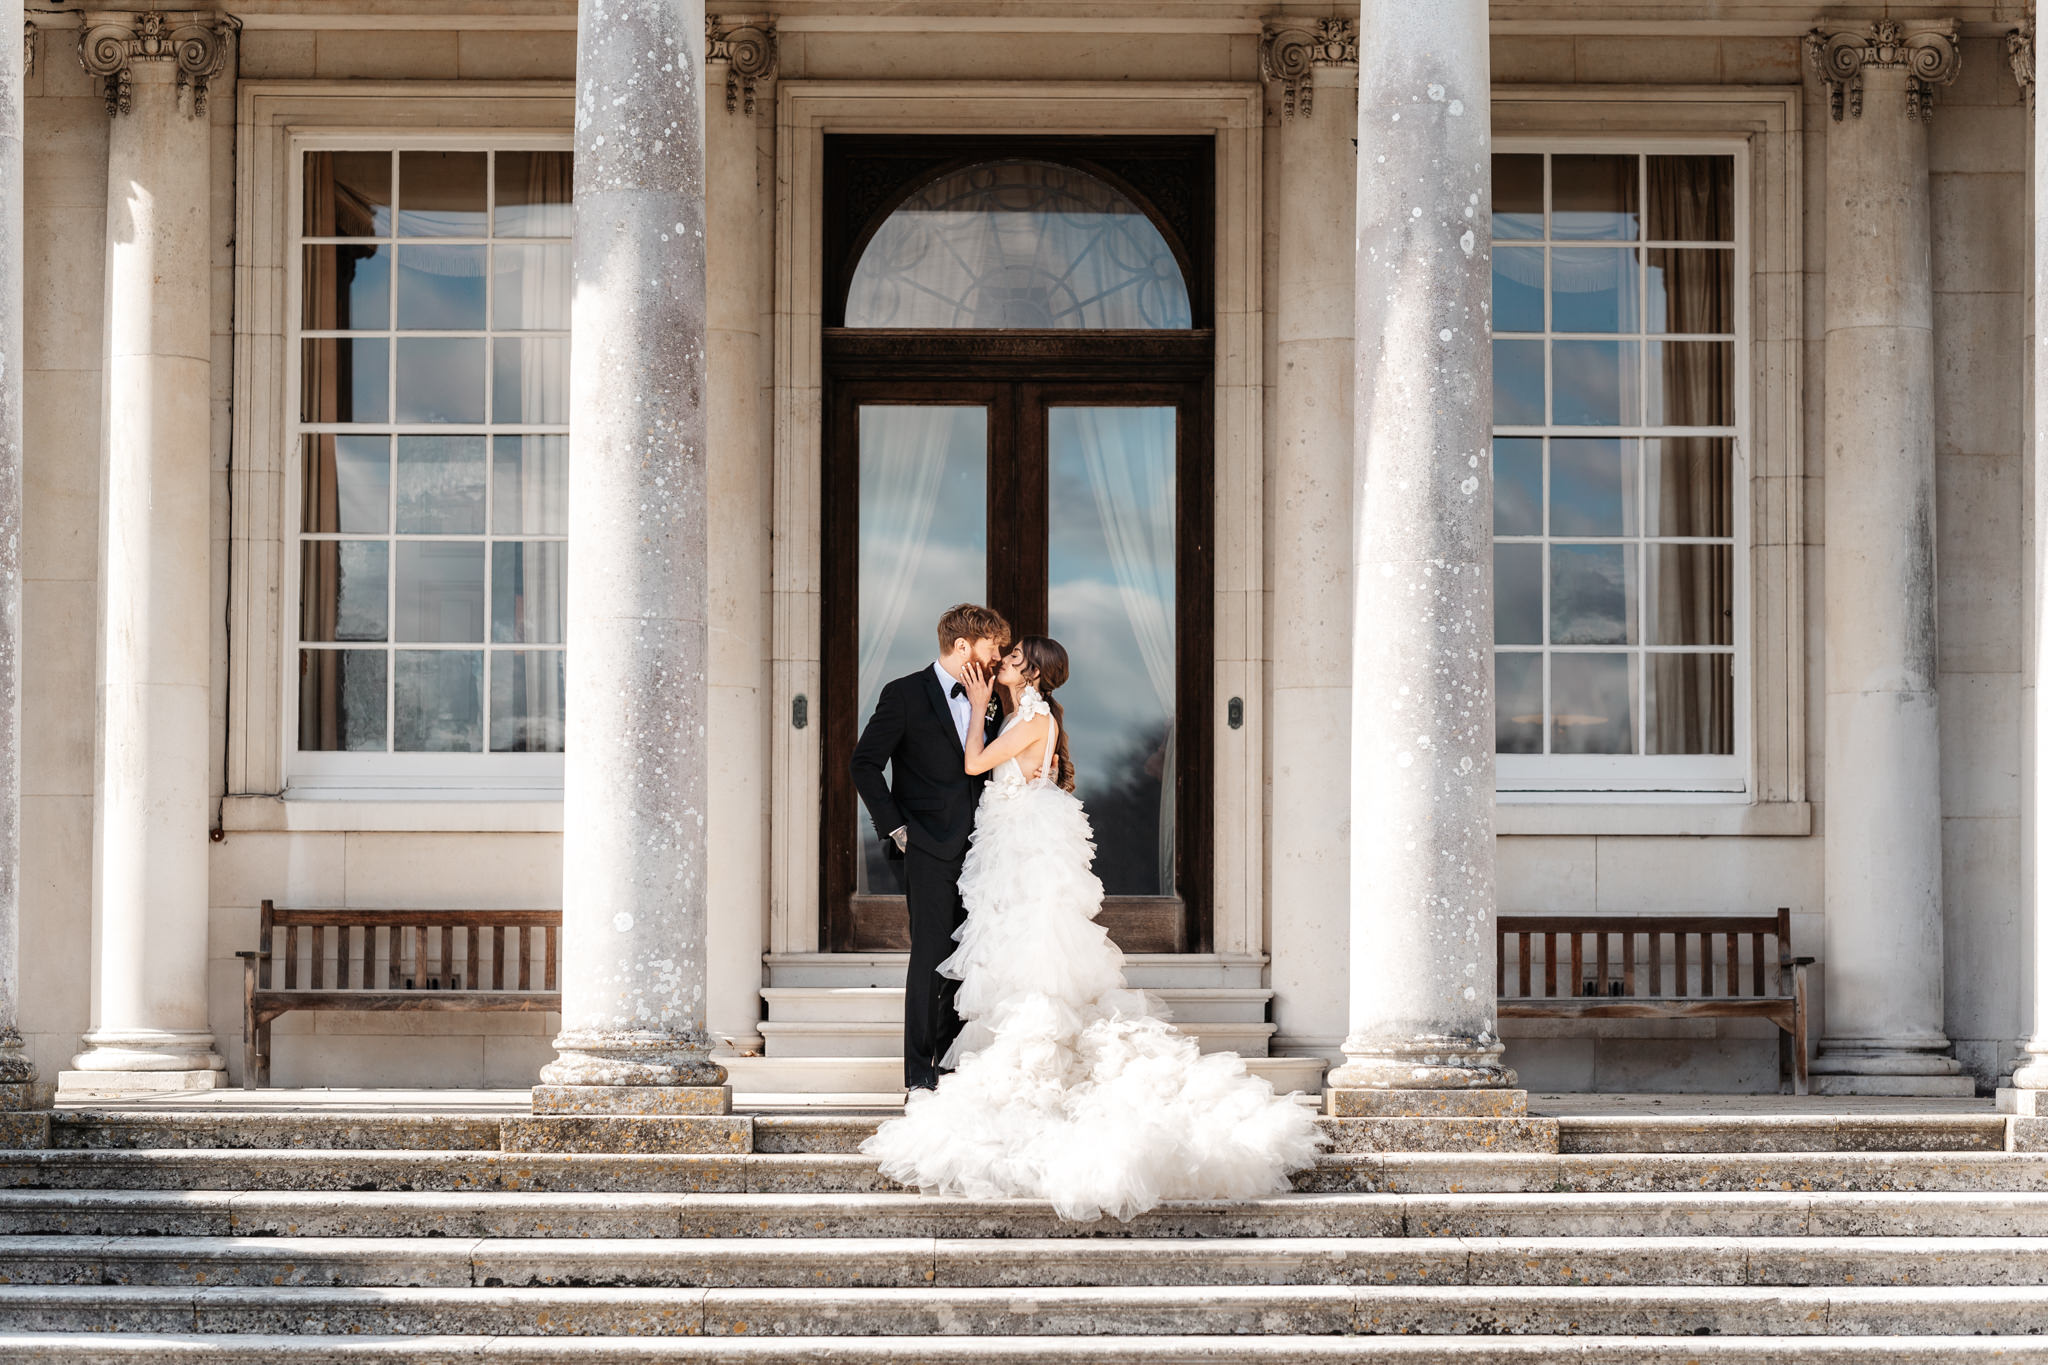 bride and groom wedding portrait outside their wedding venue in hampshire